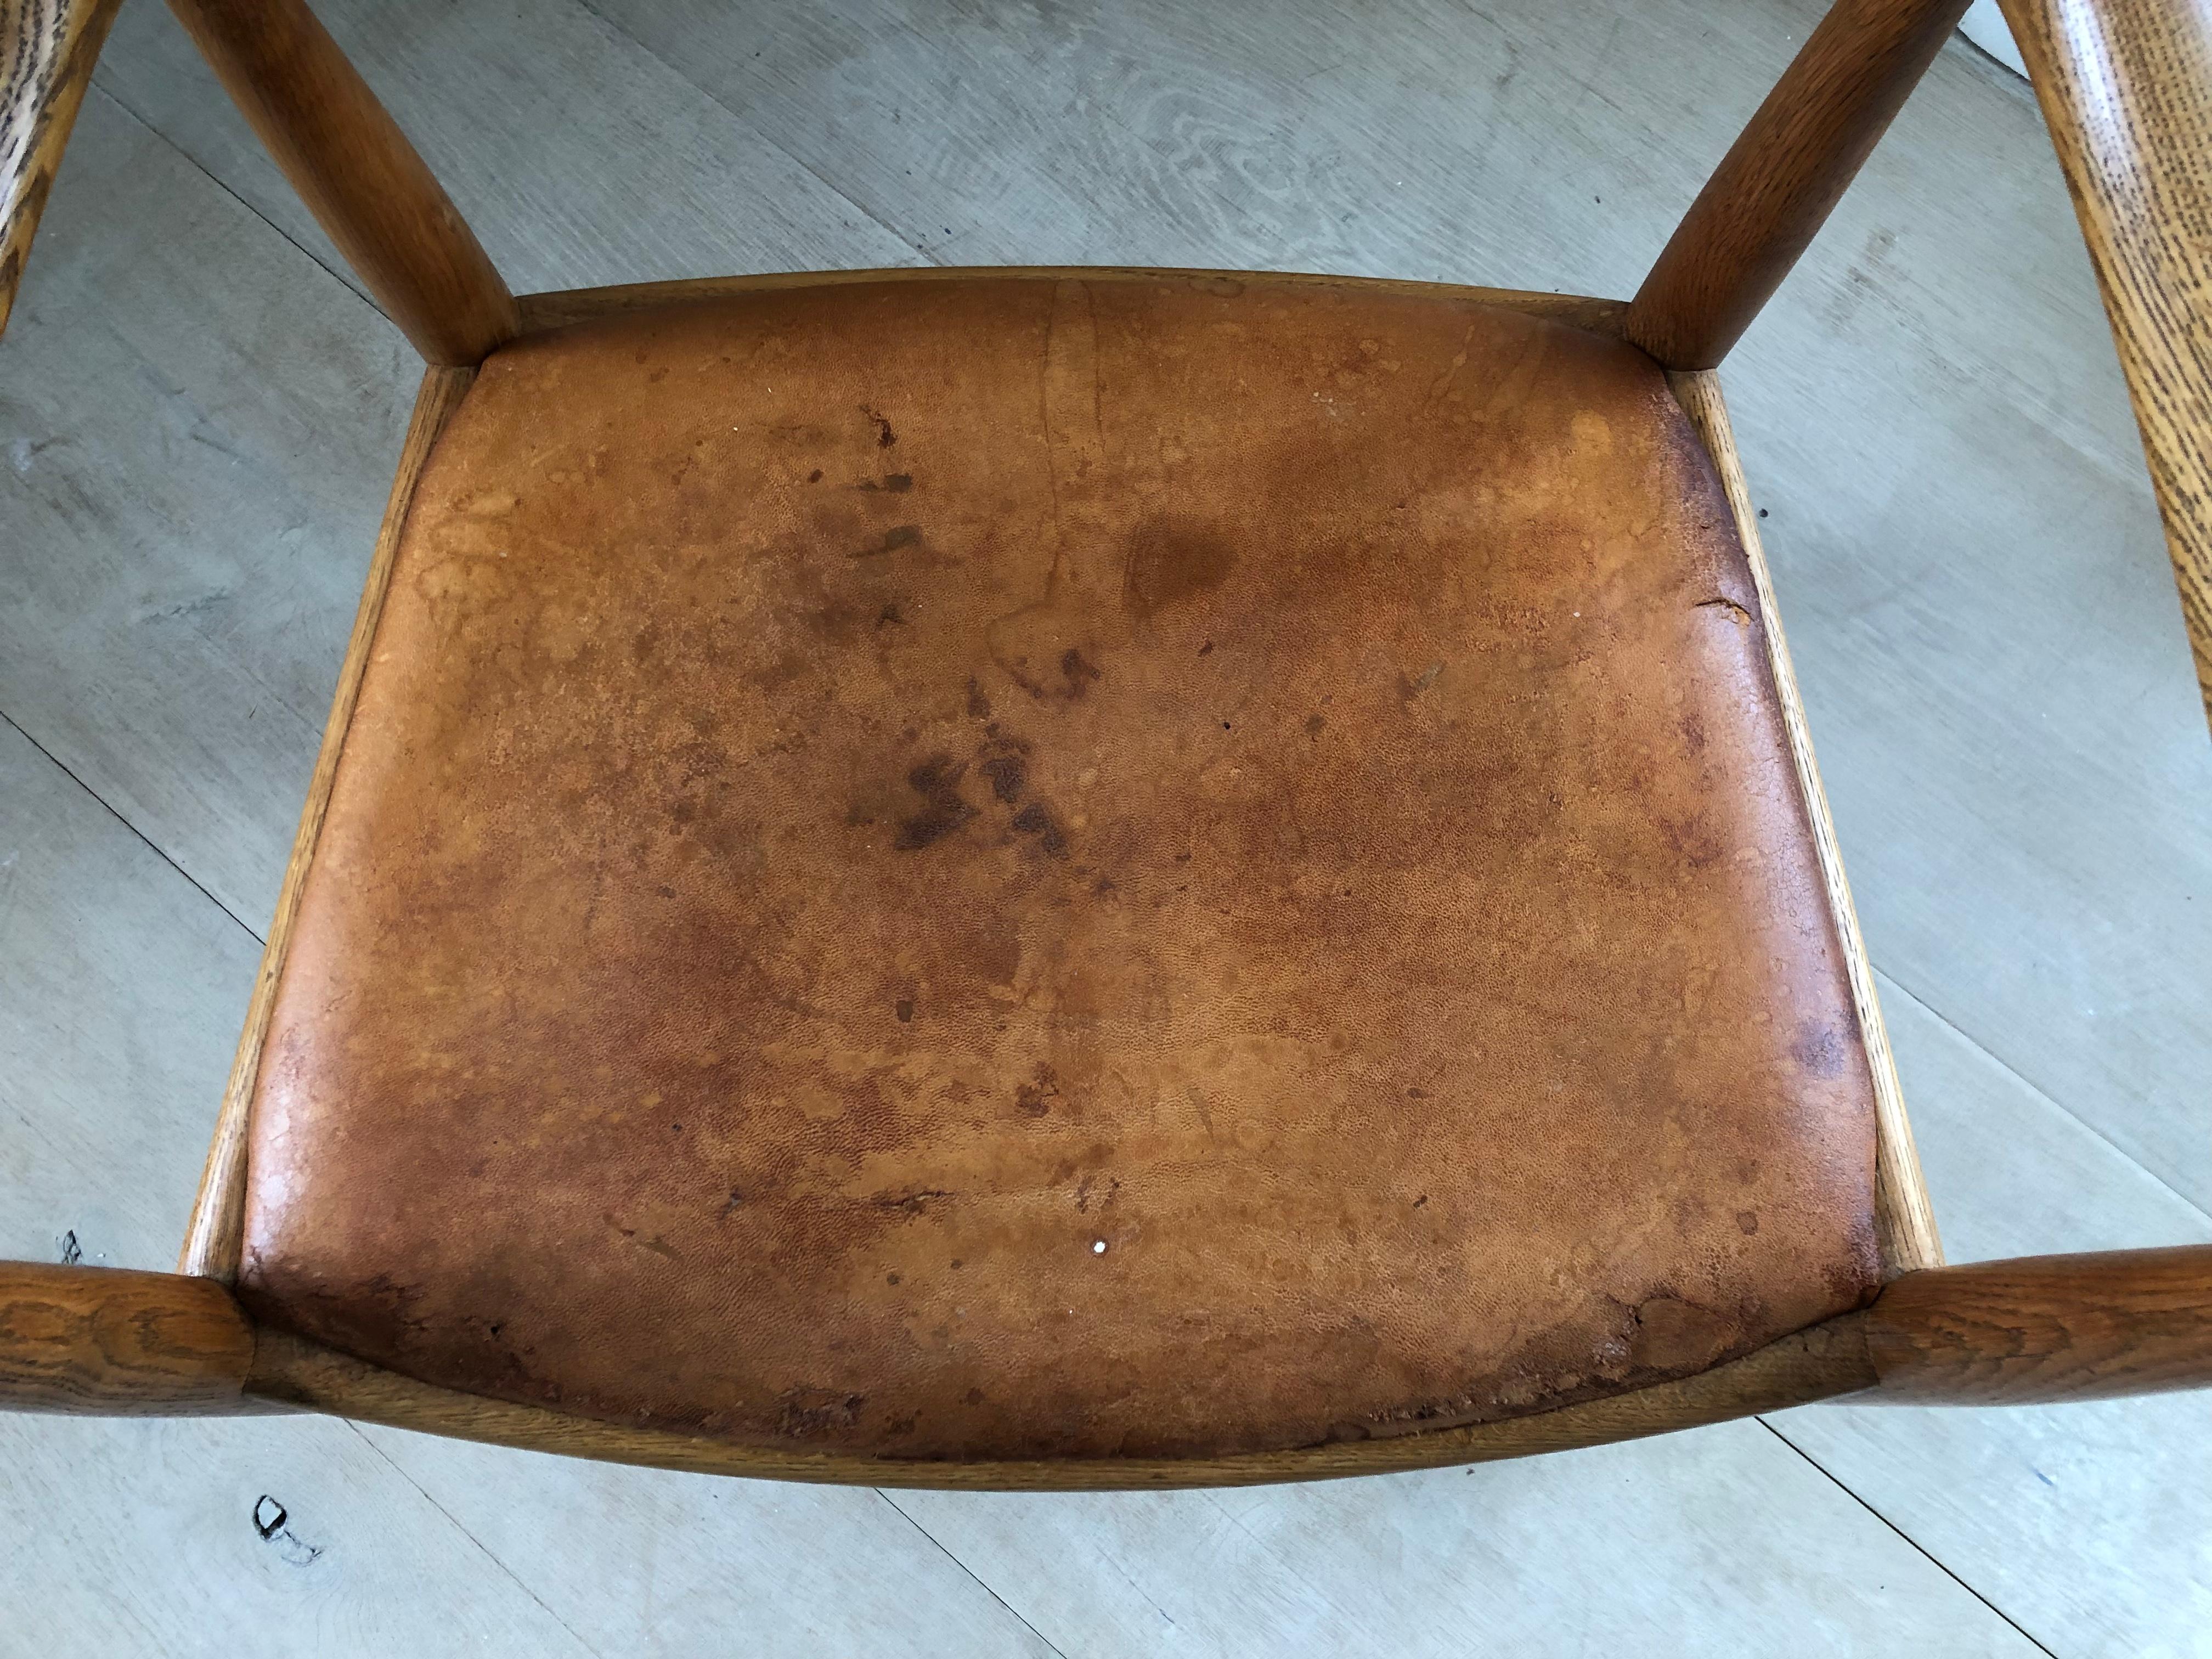 This chair is a excellent vintage example of Wegner's round chair made of oak. The label places it as made before 1970. 

The leather on the seat shows some peeling, wear and tear to the surface as shown in pictures. The leather on the seat and